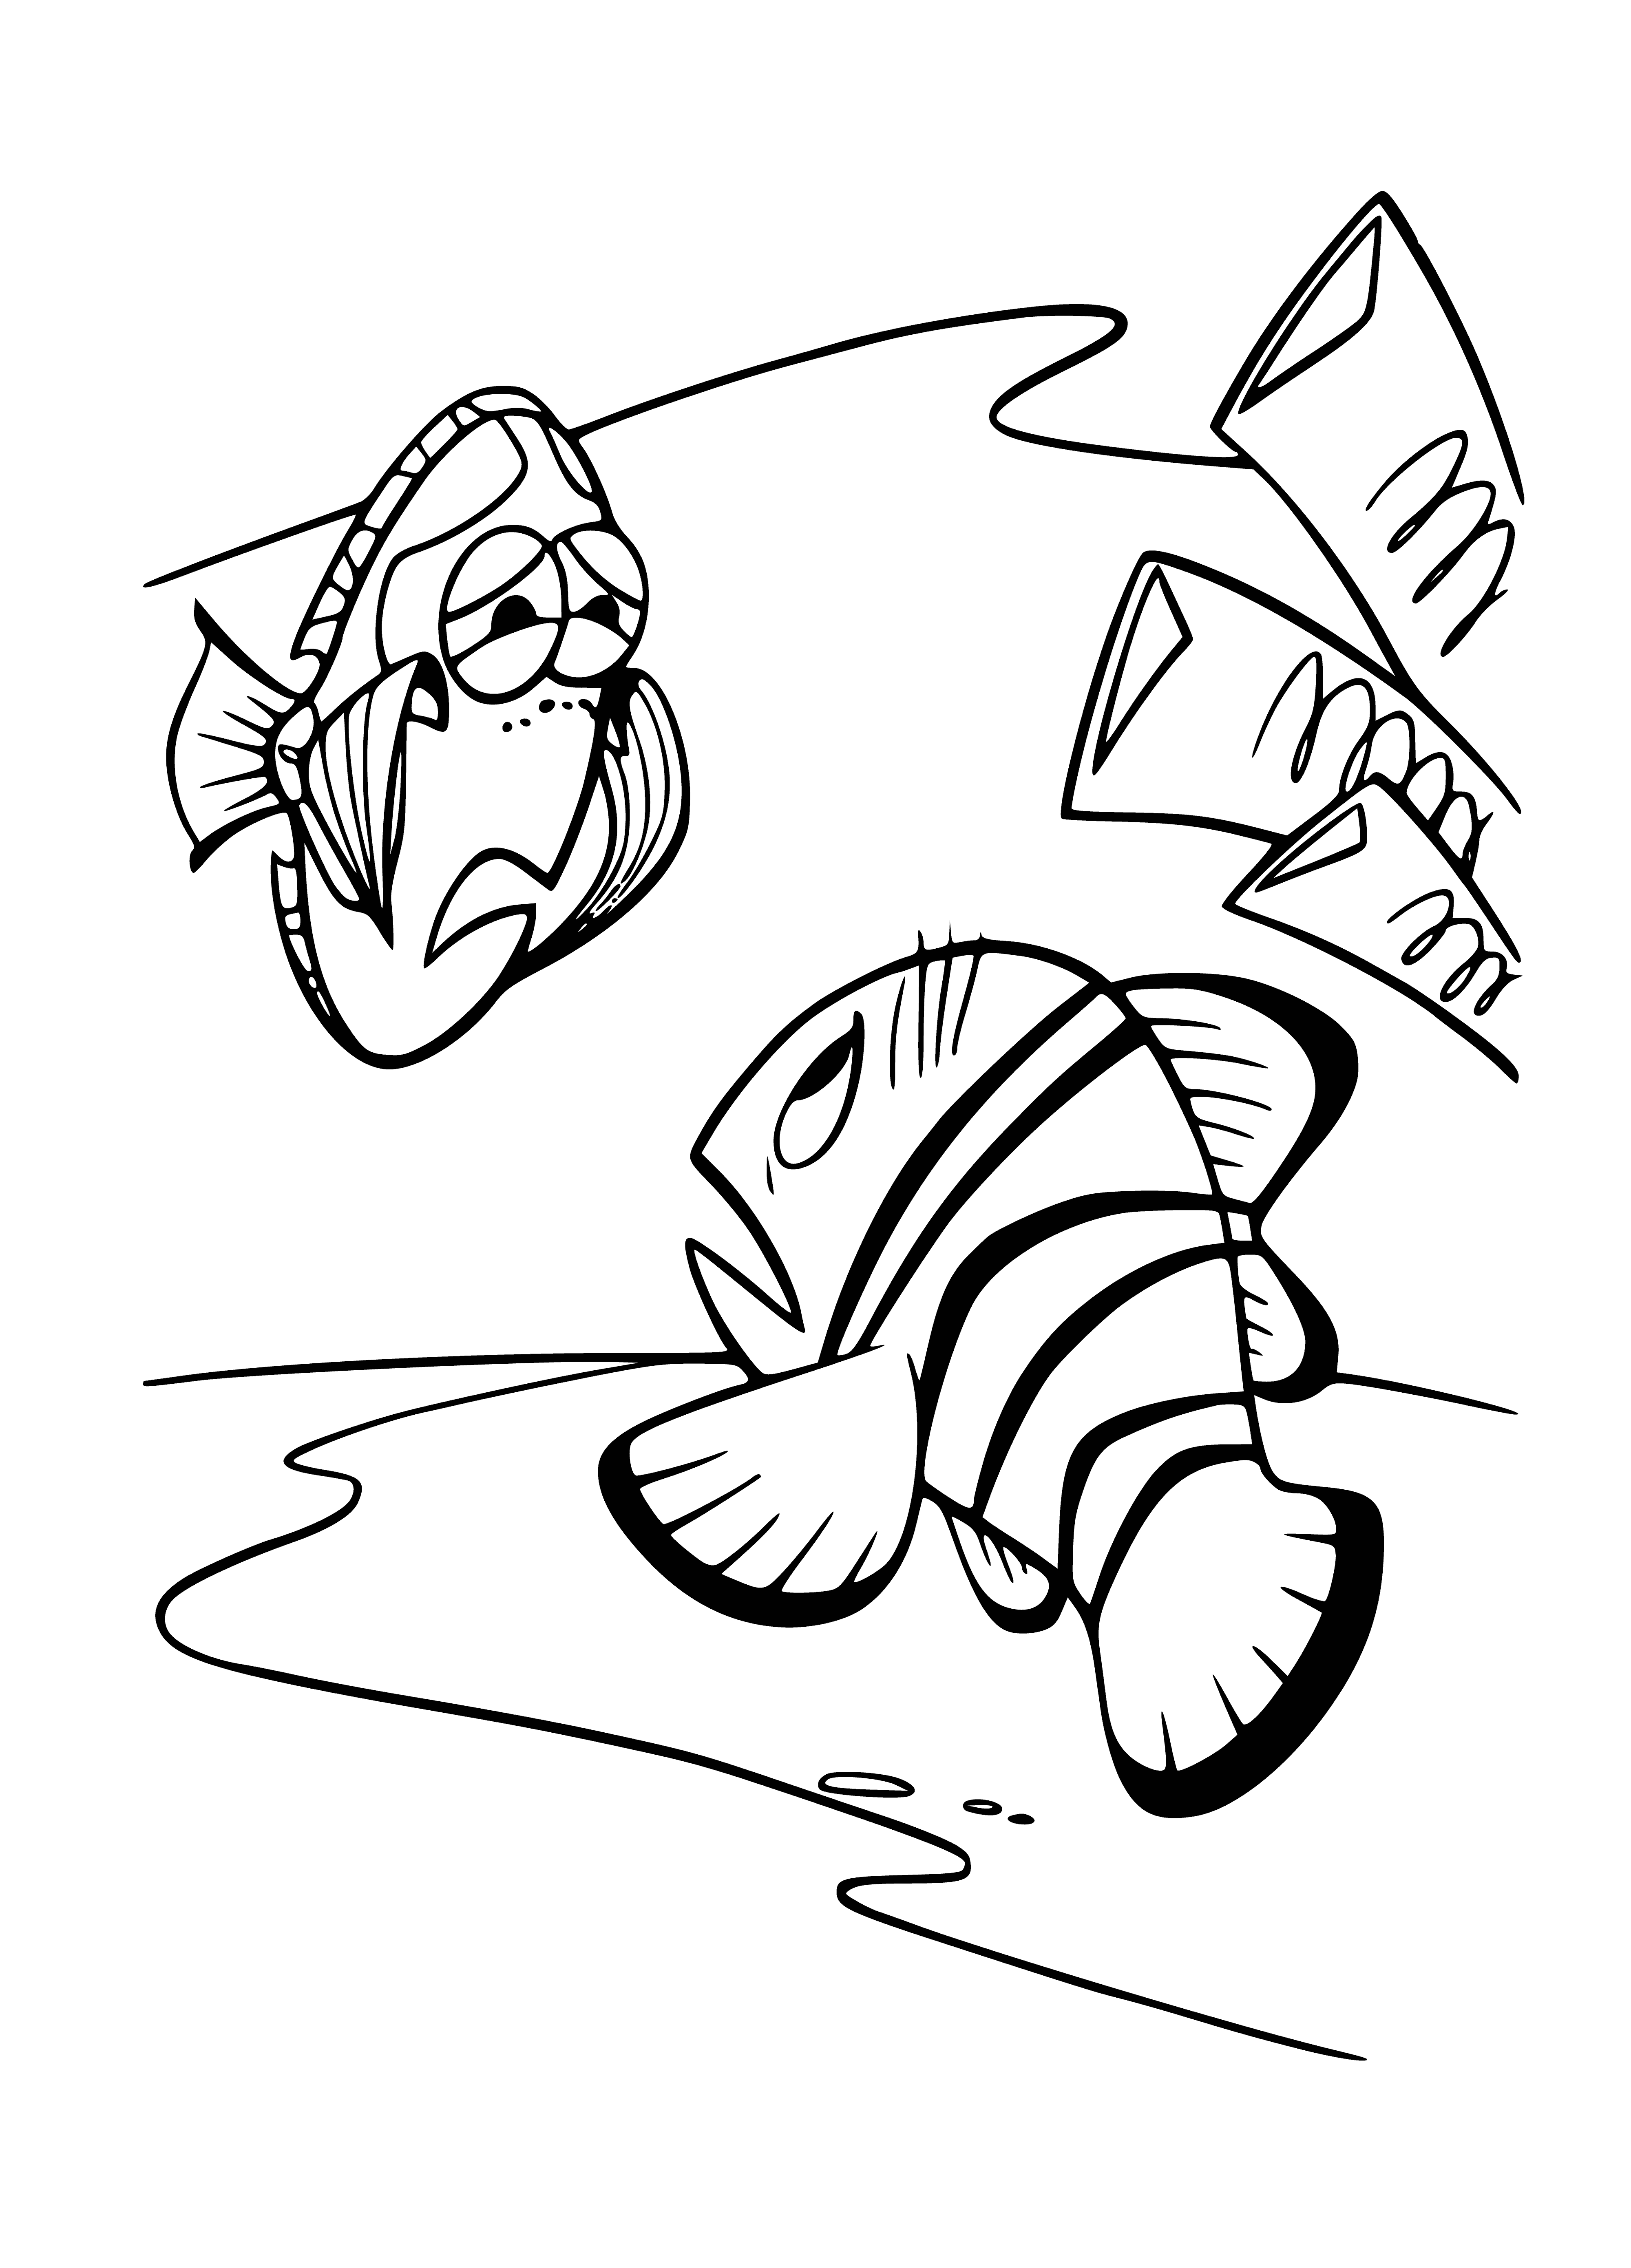 Dorry fish coloring page